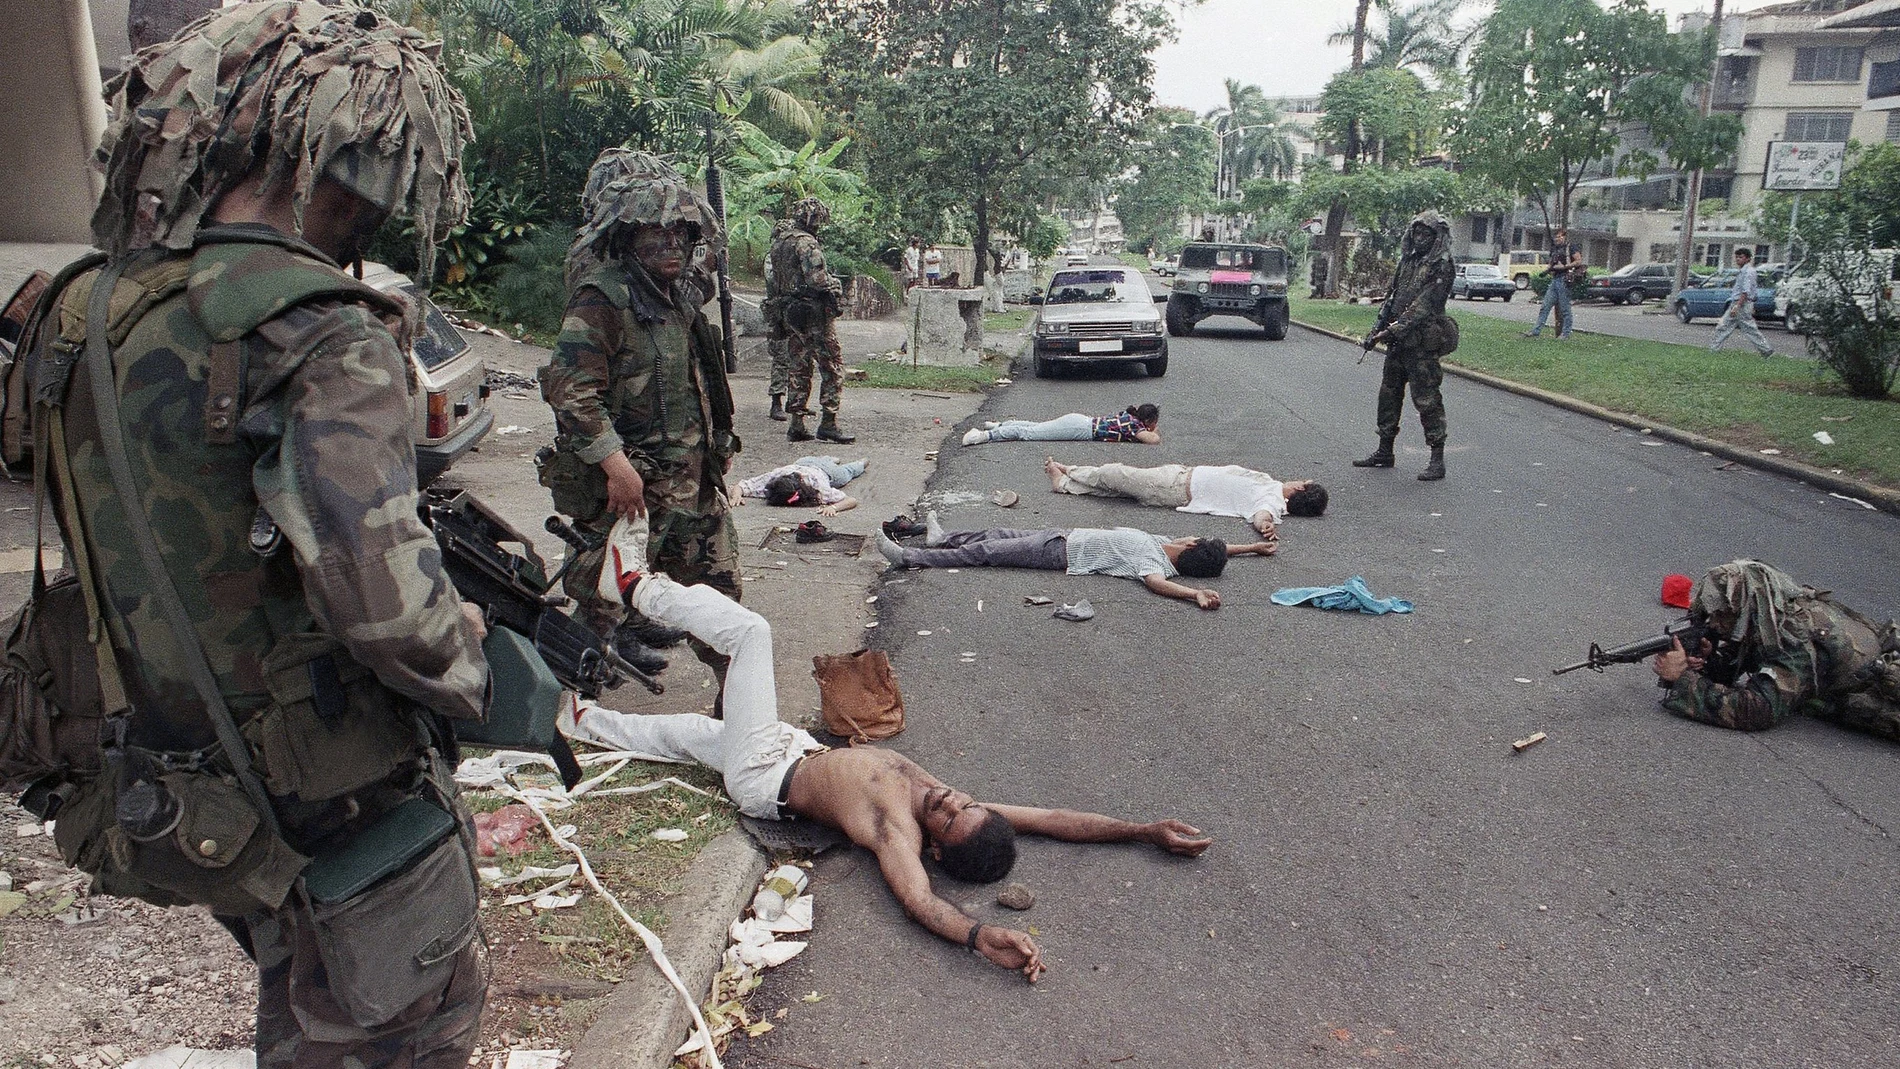 FILE - In this Dec. 26, 1989 file photo, U.S. soldiers take aim while searching suspects detained outside the home of a business associate of Manuel Noriega in Panama City. In 1989, the U.S. invaded Panama to oust strongman Manuel Noriega. (AP Photo/Ezequiel Becerra, File)